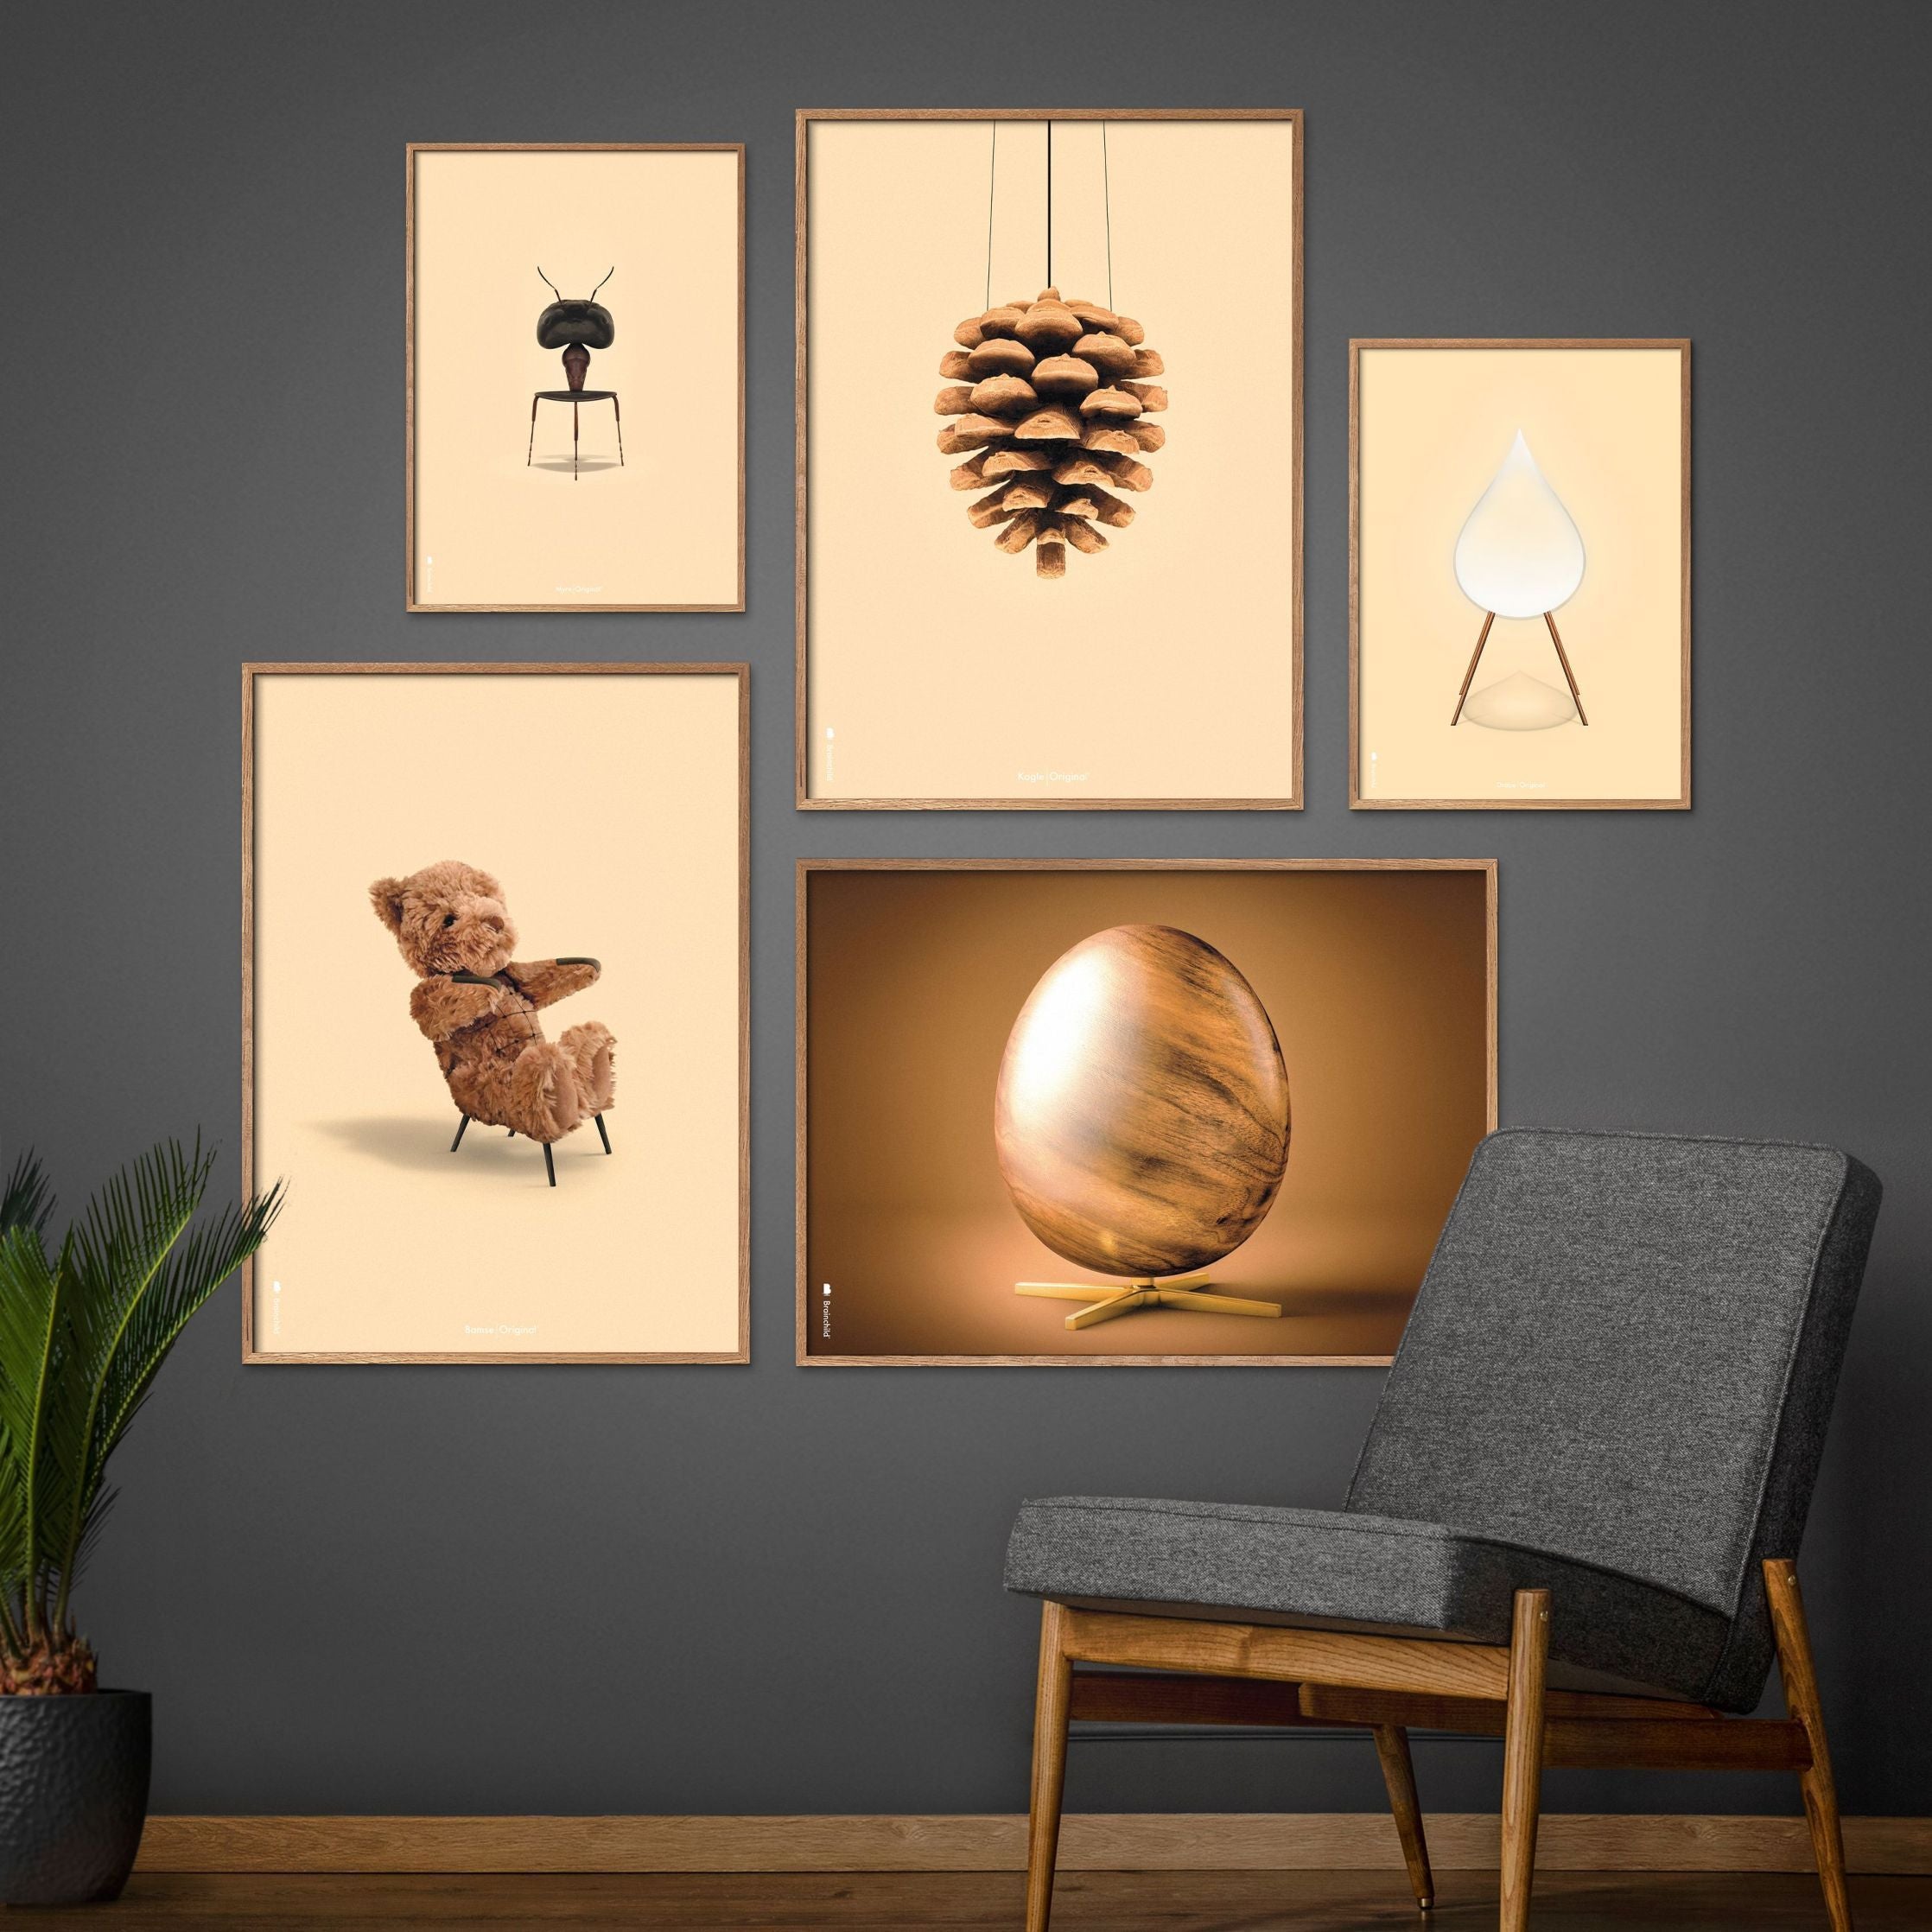 Brainchild Teddy Bear Classic Poster, Frame Made Of Dark Wood 70x100 Cm, Sand Colored Background